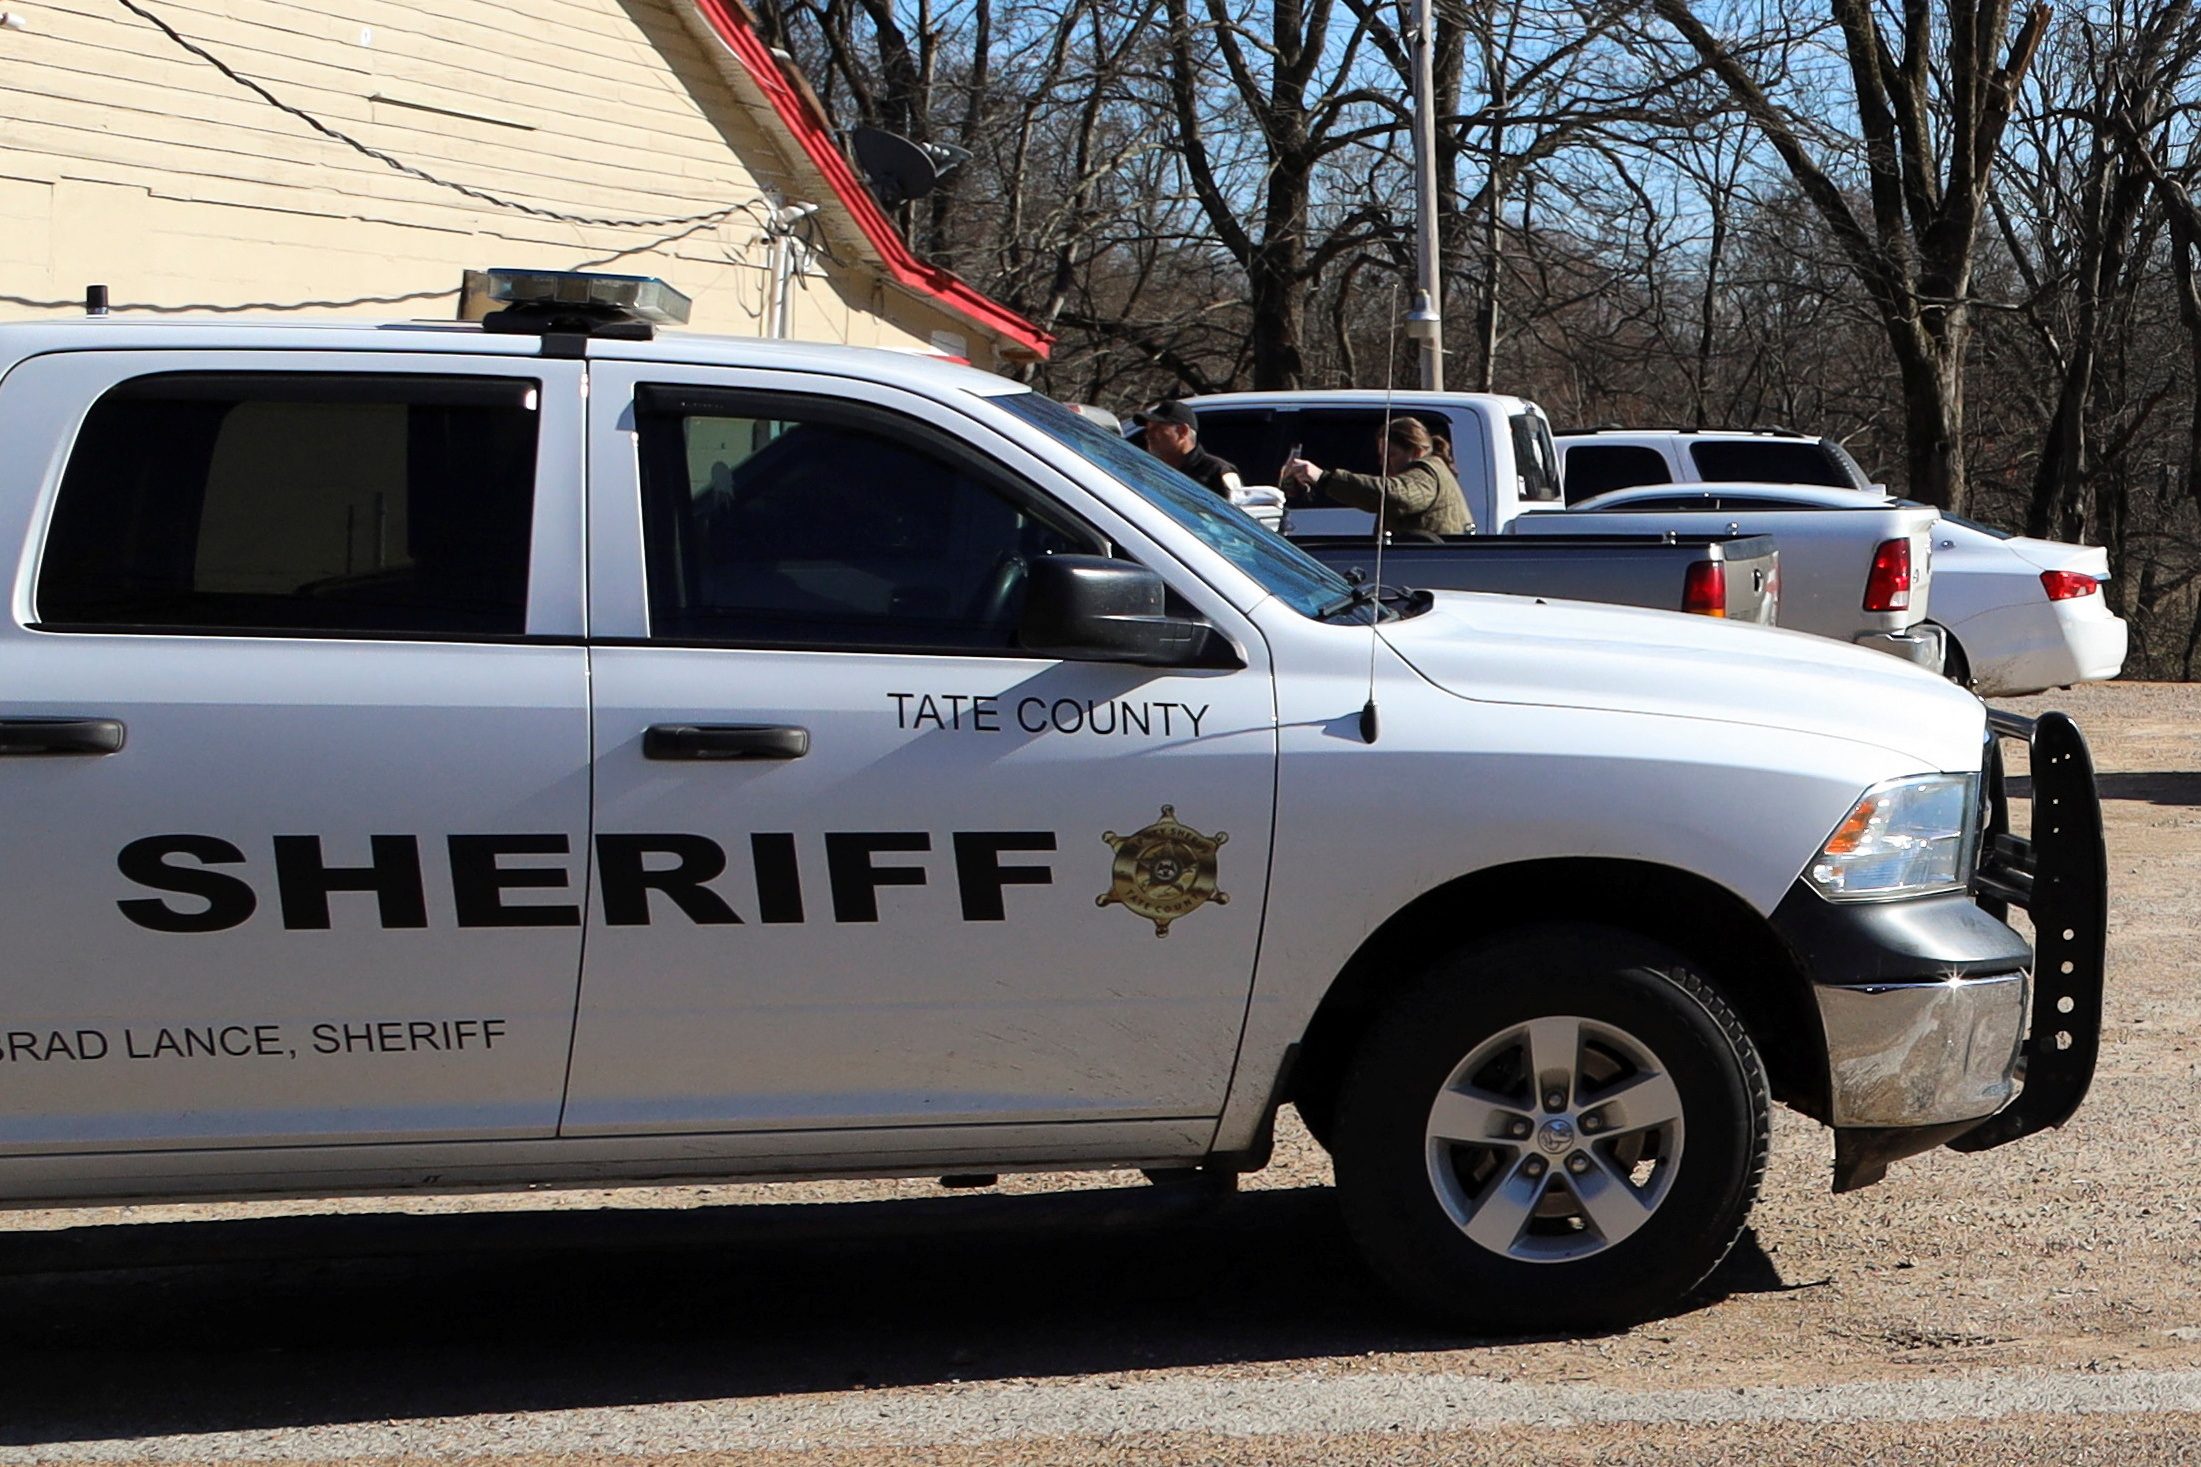 6 dead as gunman goes on rampage in small Mississippi town